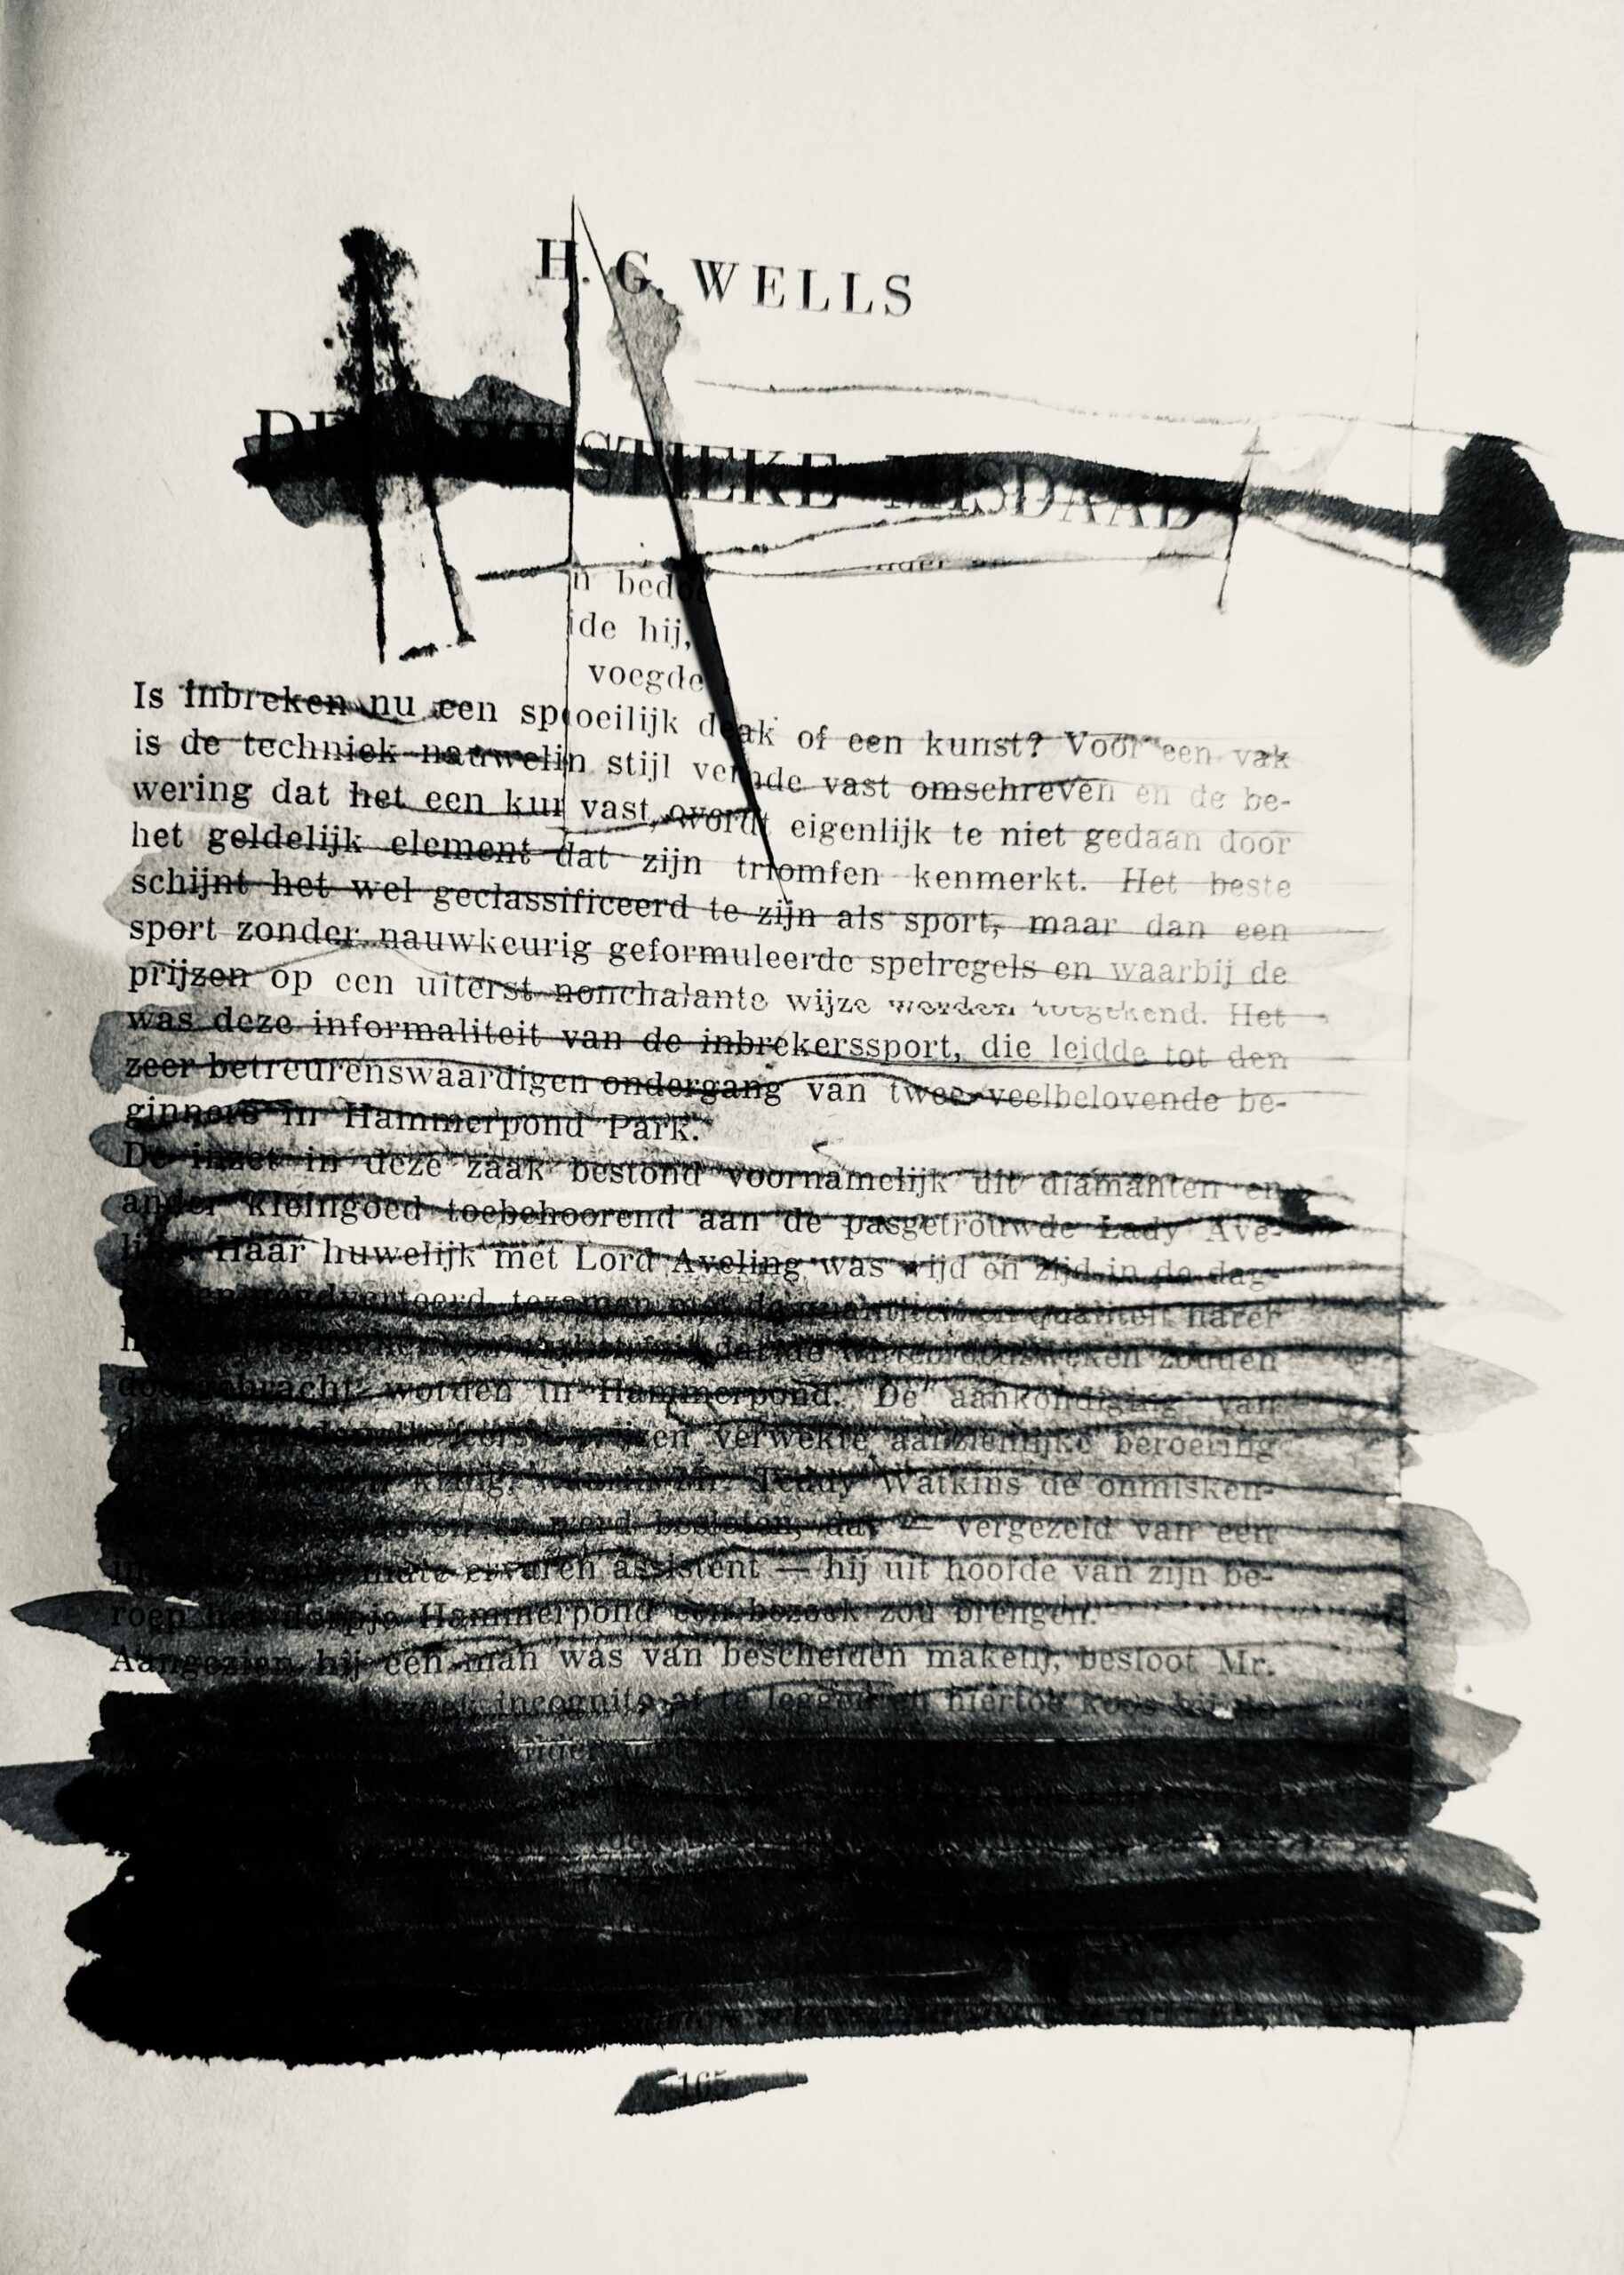 Darkness on the Edges of Words